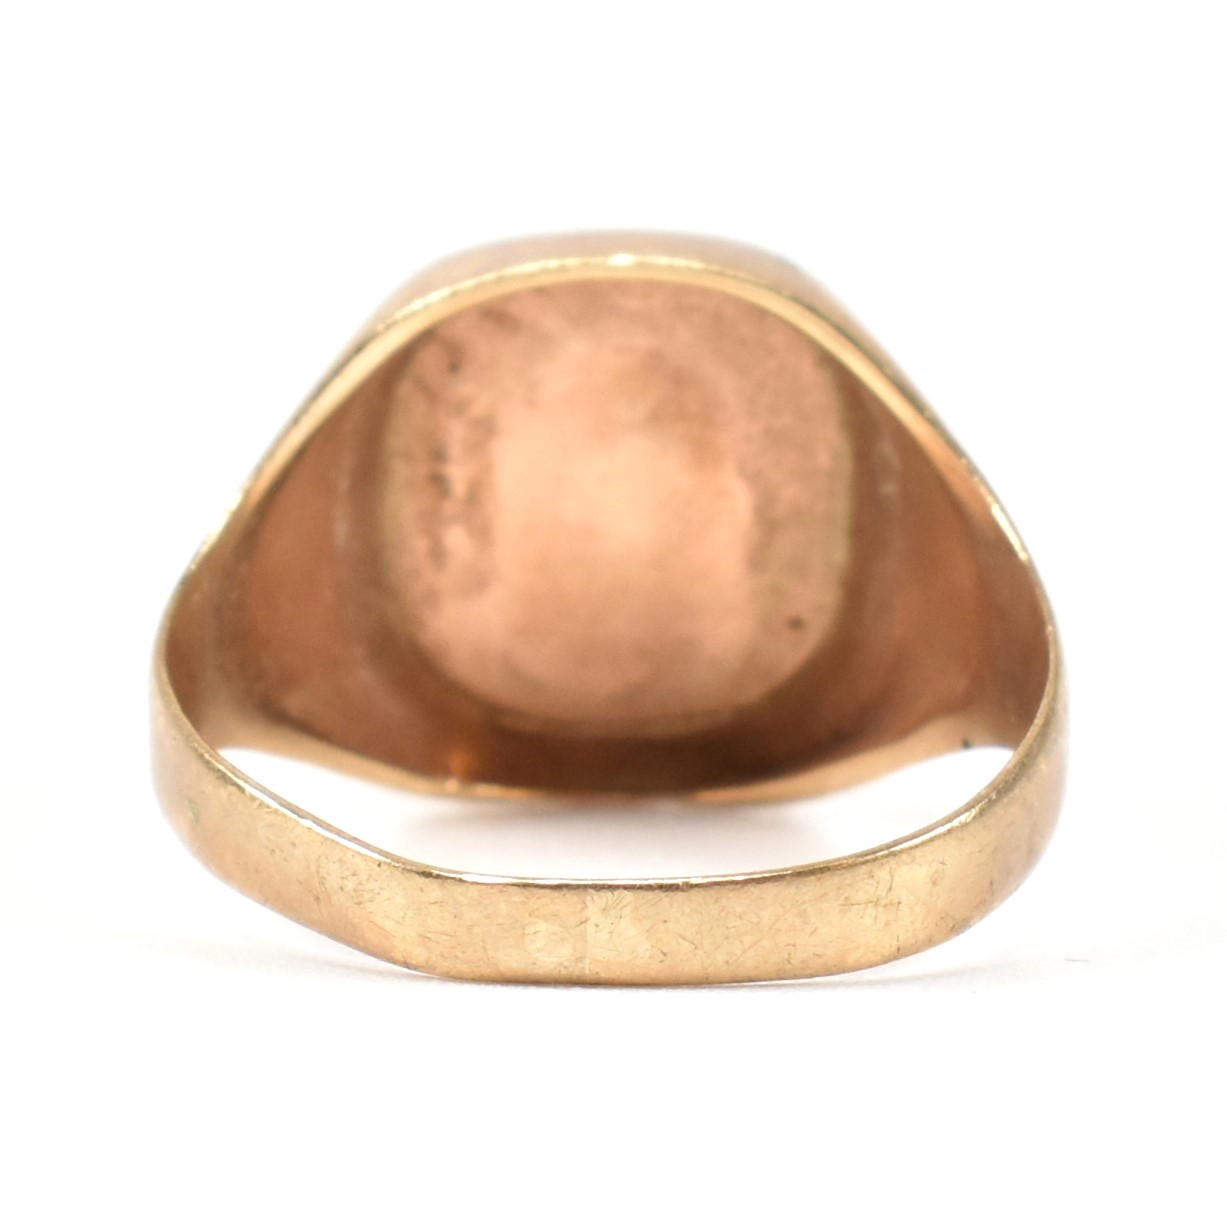 HALLMARKED 9CT GOLD ENGRAVED SIGNET RING - Image 5 of 9